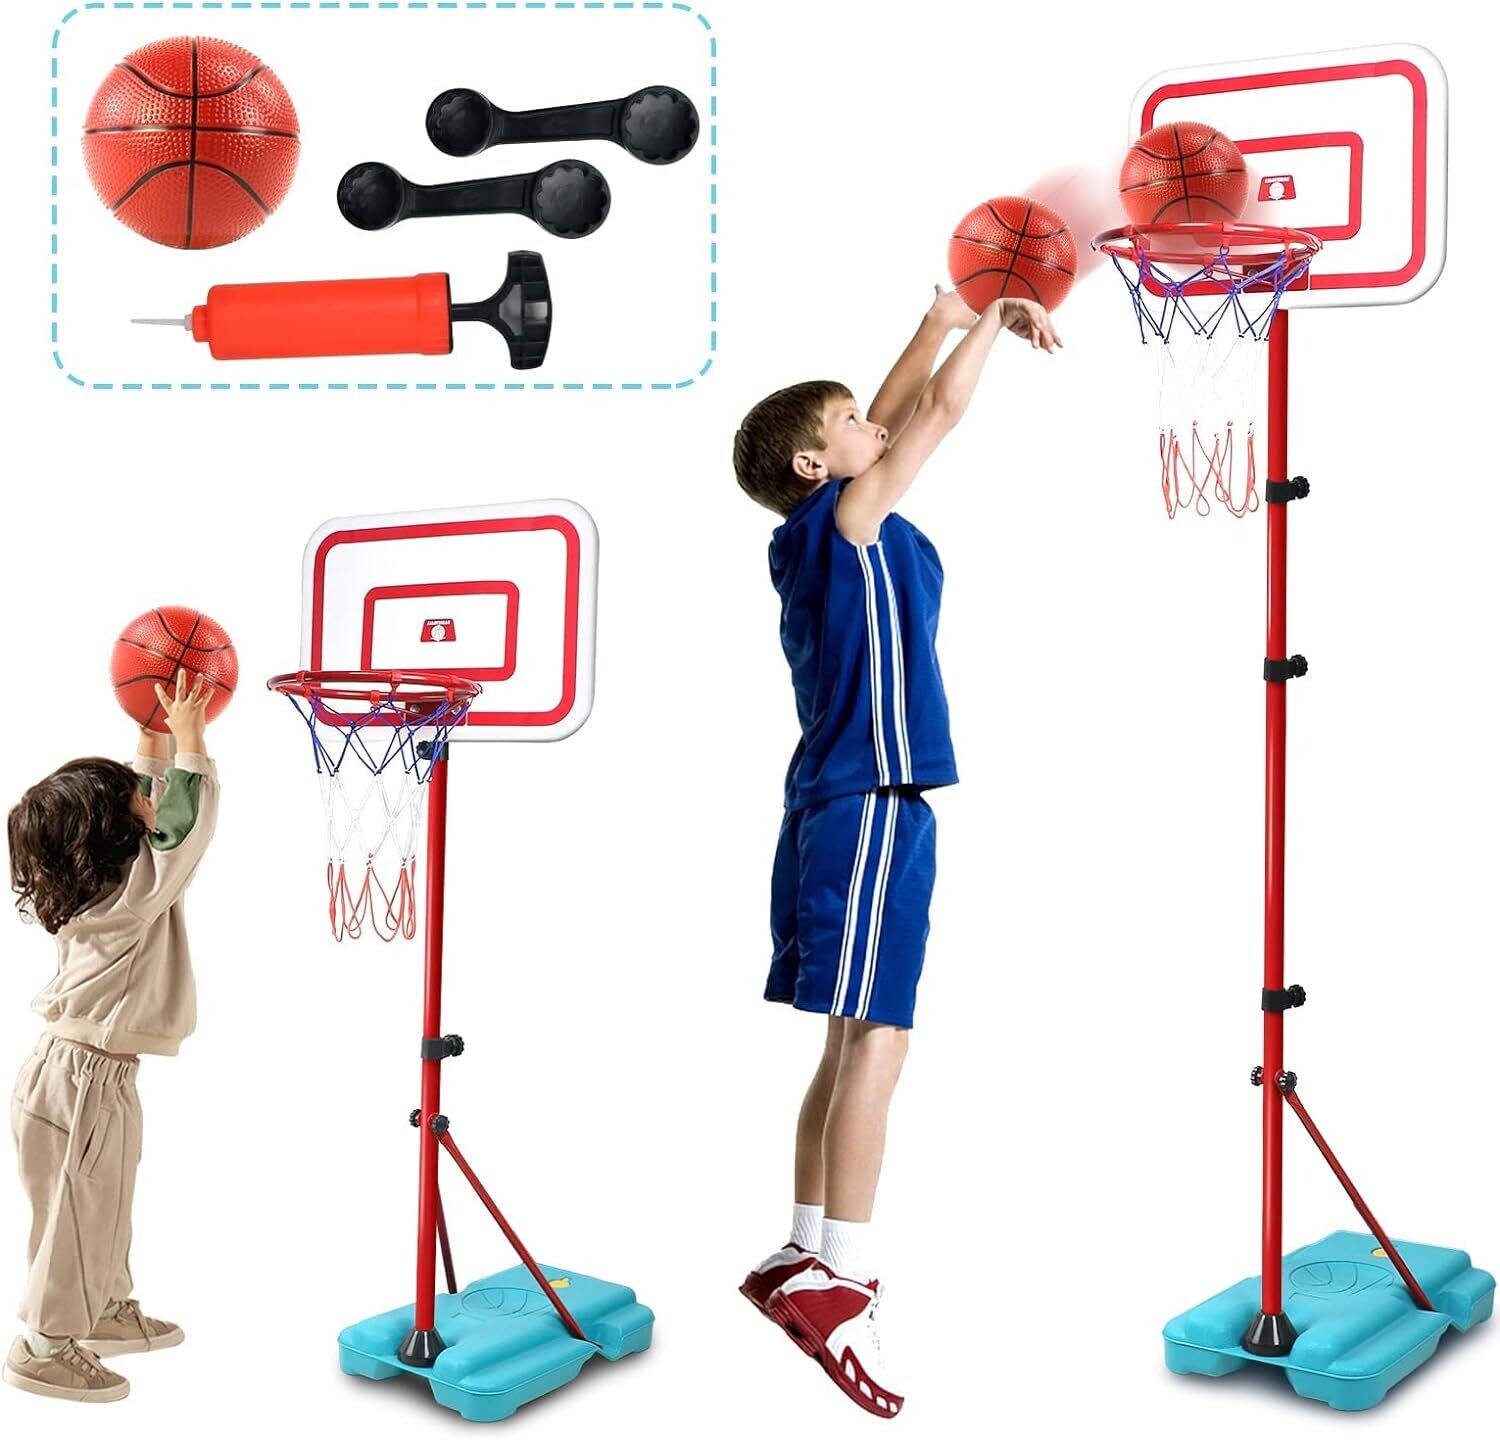 190-CM Adjustable Basketball Hoop and Stand for Children with Inflator Portable and Adjustable Basketball Set with Net and Ball Children's Outdoor Games